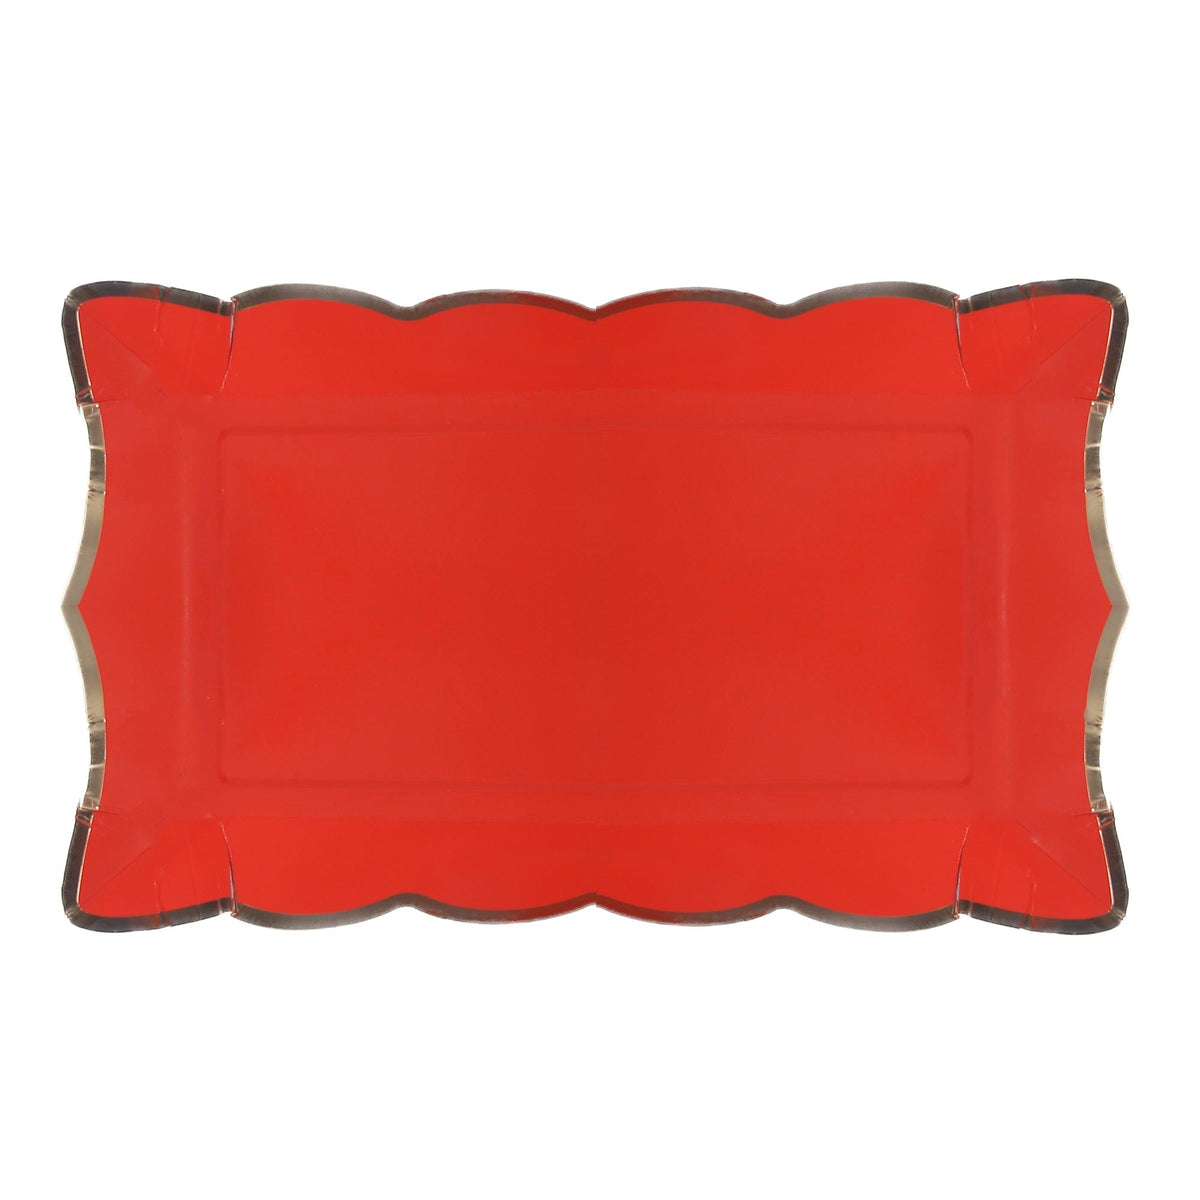 YIWU SANDY PAPER PRODUCTS CO., LTD Everyday Entertaining Red Rectangular Trays, 9 Inches, 4 Count